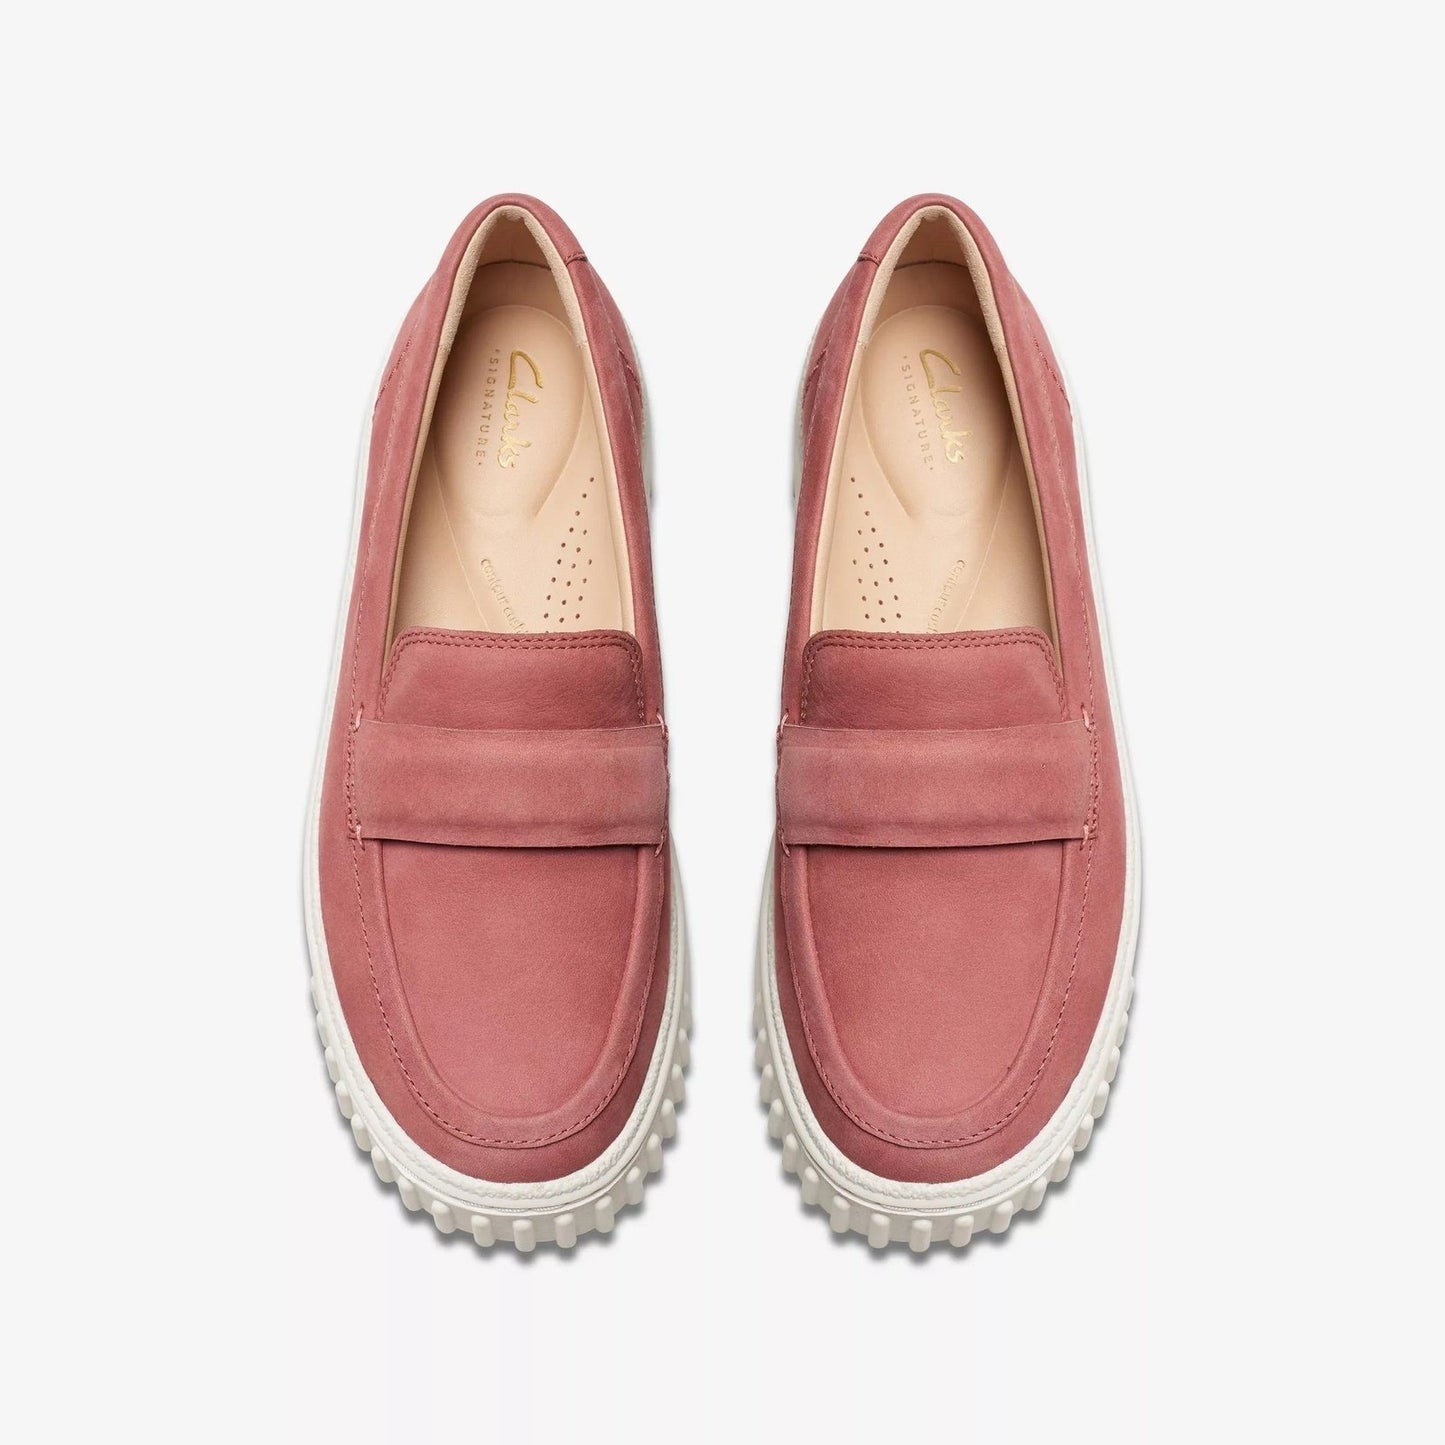 MAYHILL COVE LOAFER CLARKS